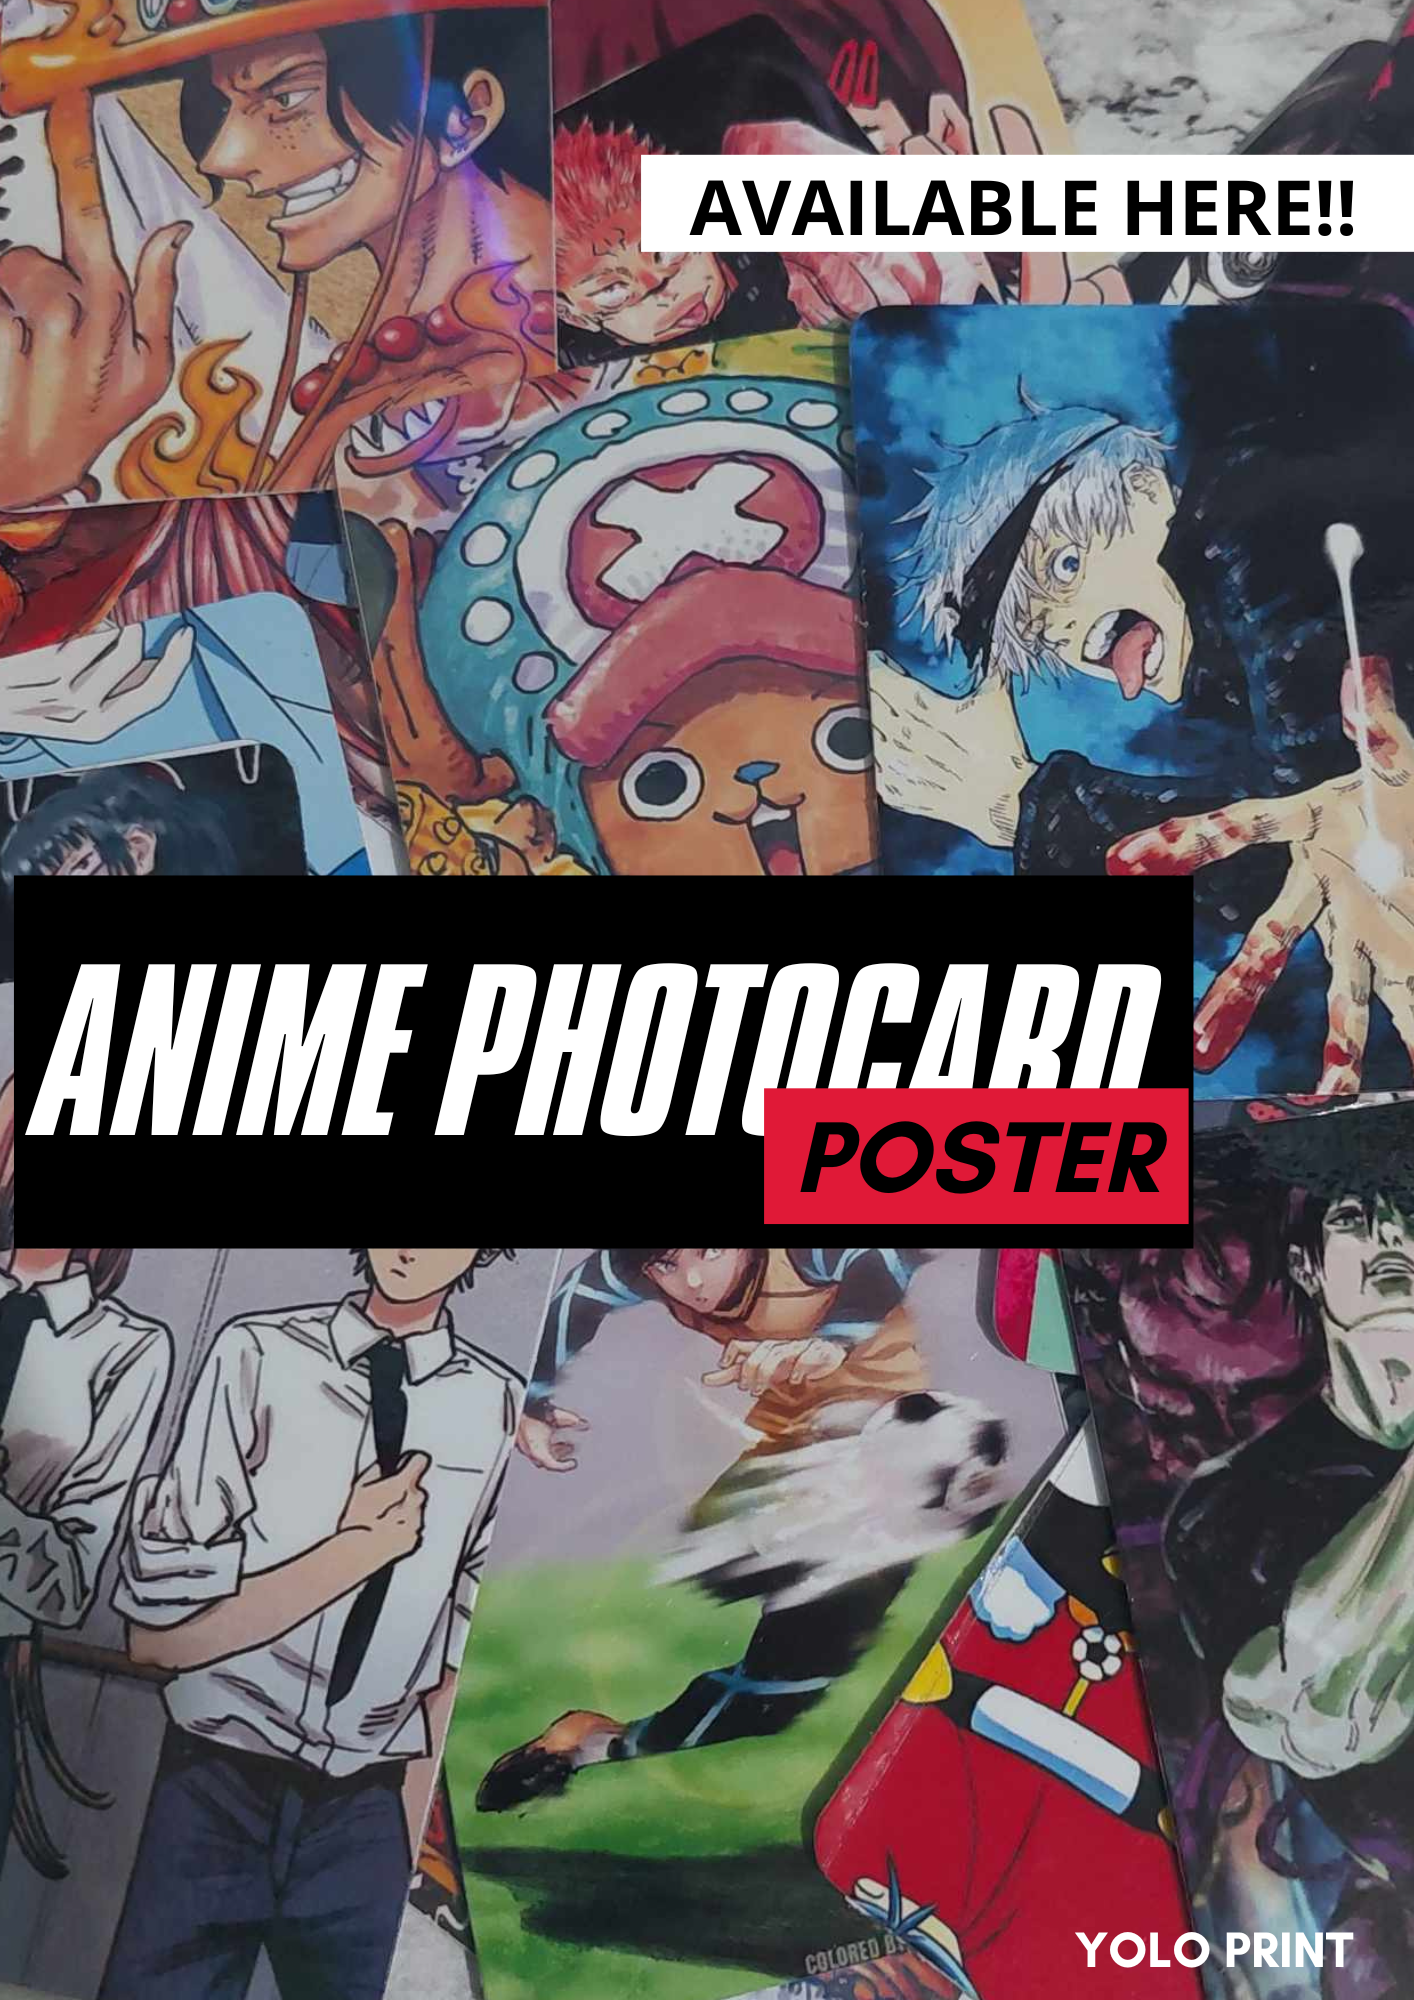 Anime Cards Anime Collectibles - Popular Japanese Anime Photocards Room  Decor, Exquisite Anime Poster Gifts for Kids, Anime Fans 50PCS : Amazon.sg:  Home